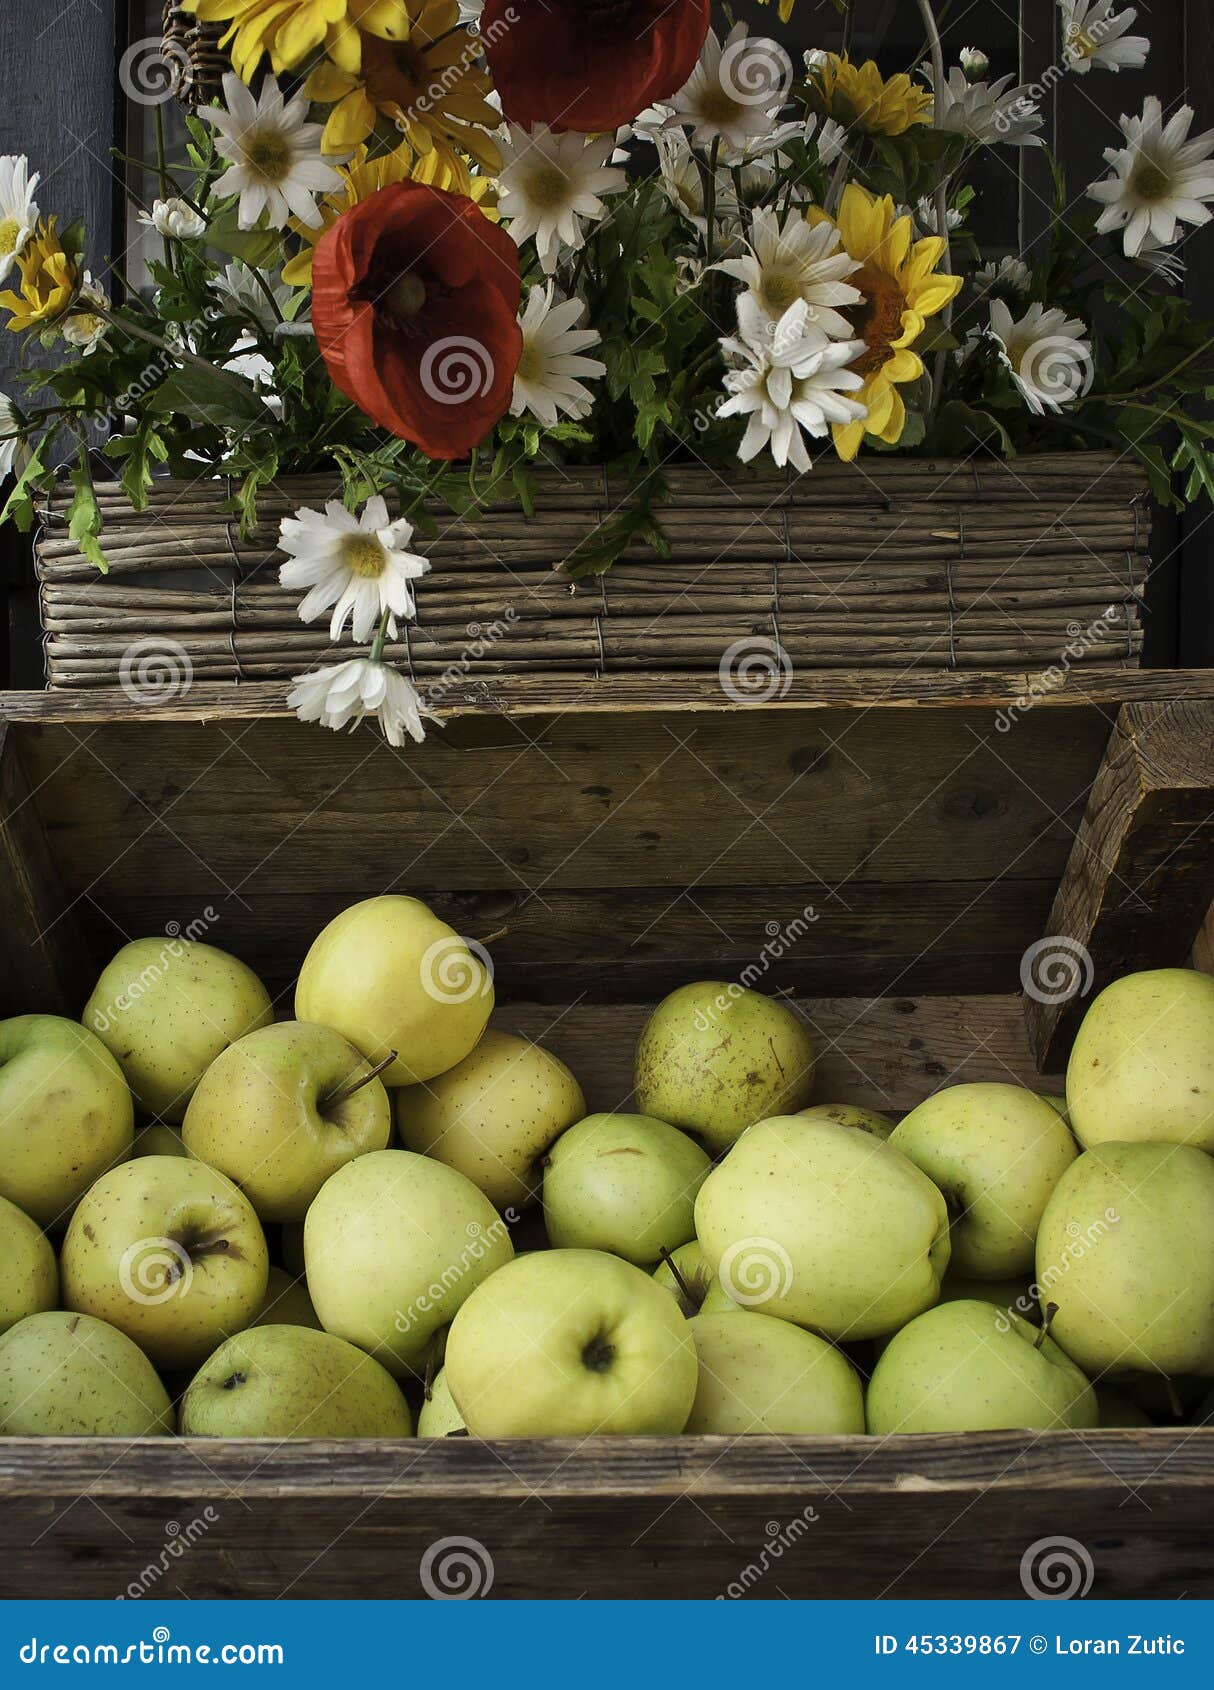 Apple Golden Delicious stock image. Image of street, wooden - 45339867